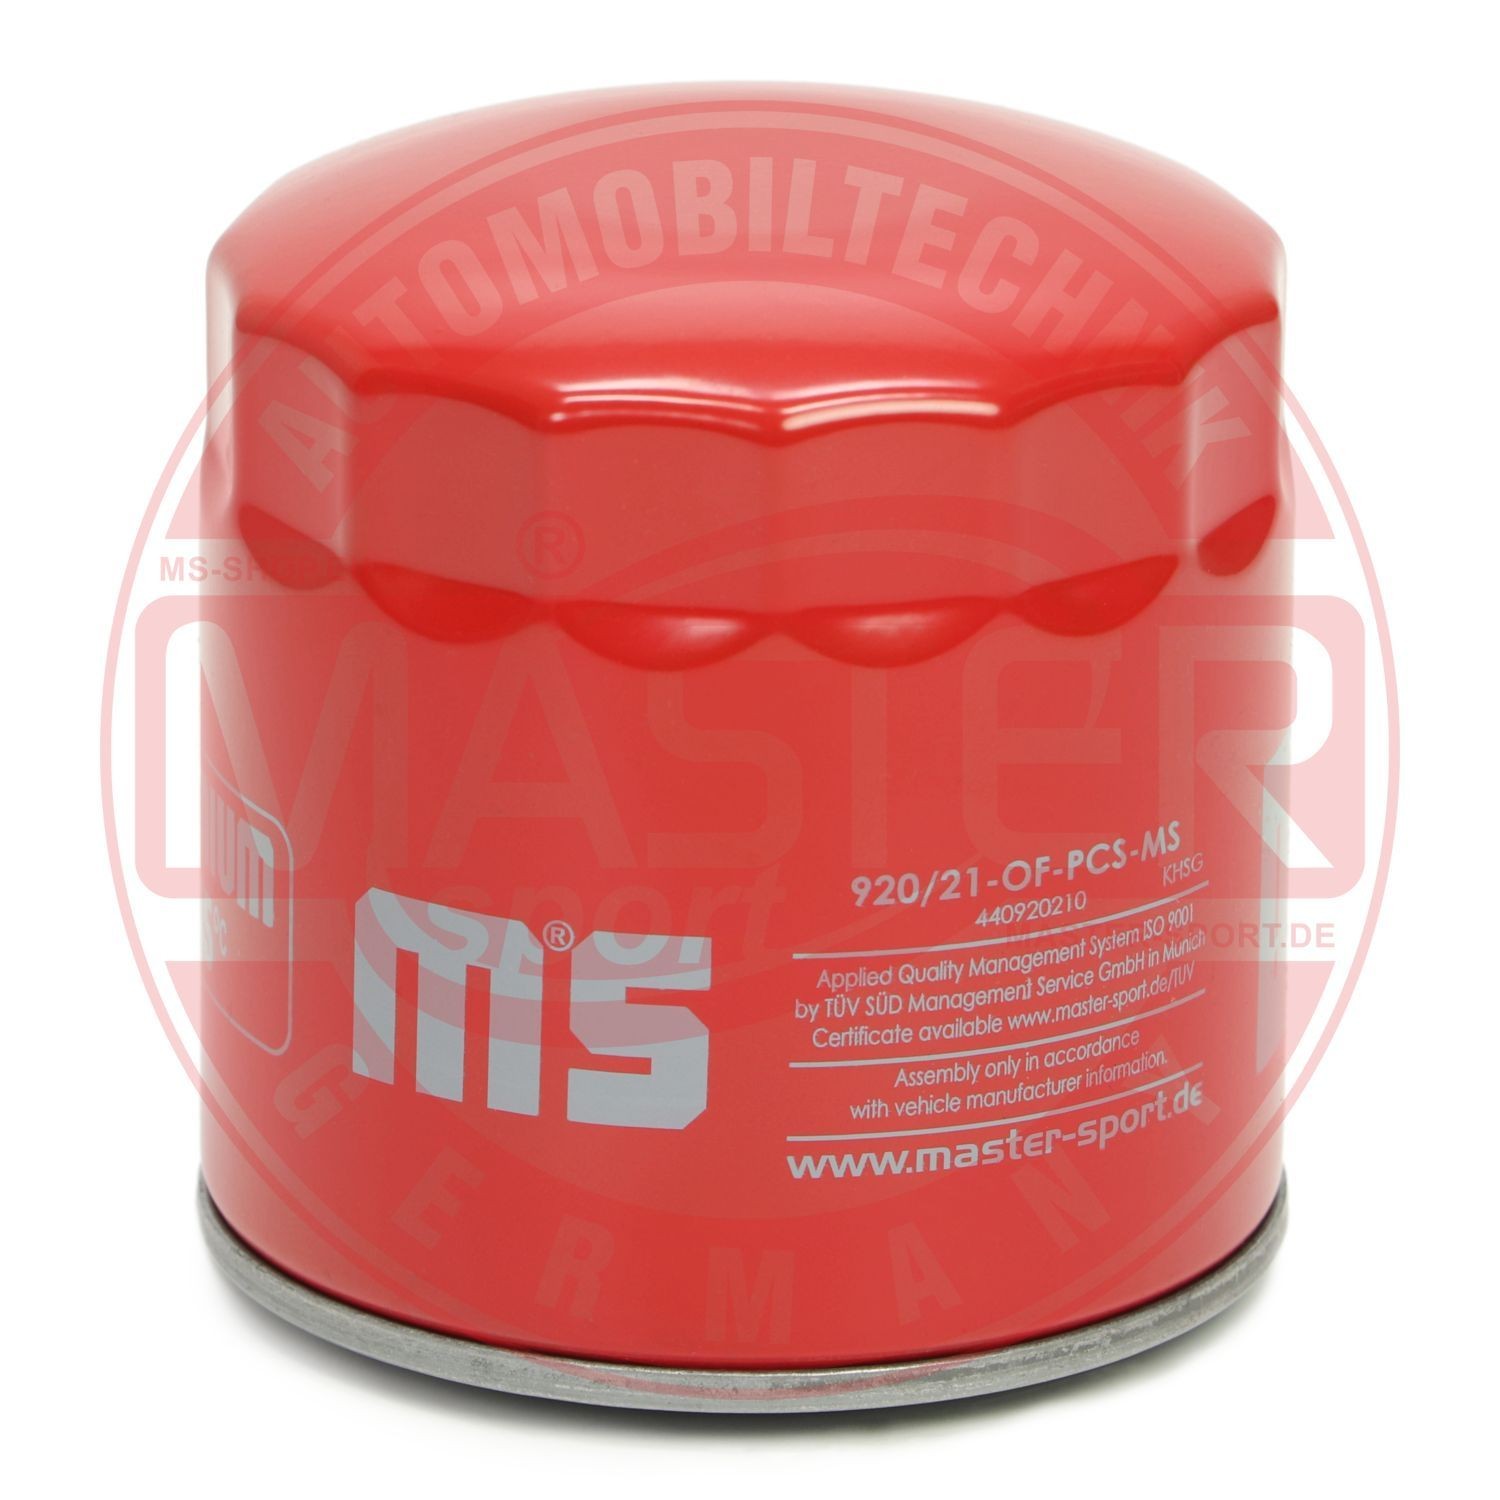 MASTER-SPORT 920/21-OF-PCS-MS Oil filter 3/4-16 UNF, with one anti-return valve, Filter Insert